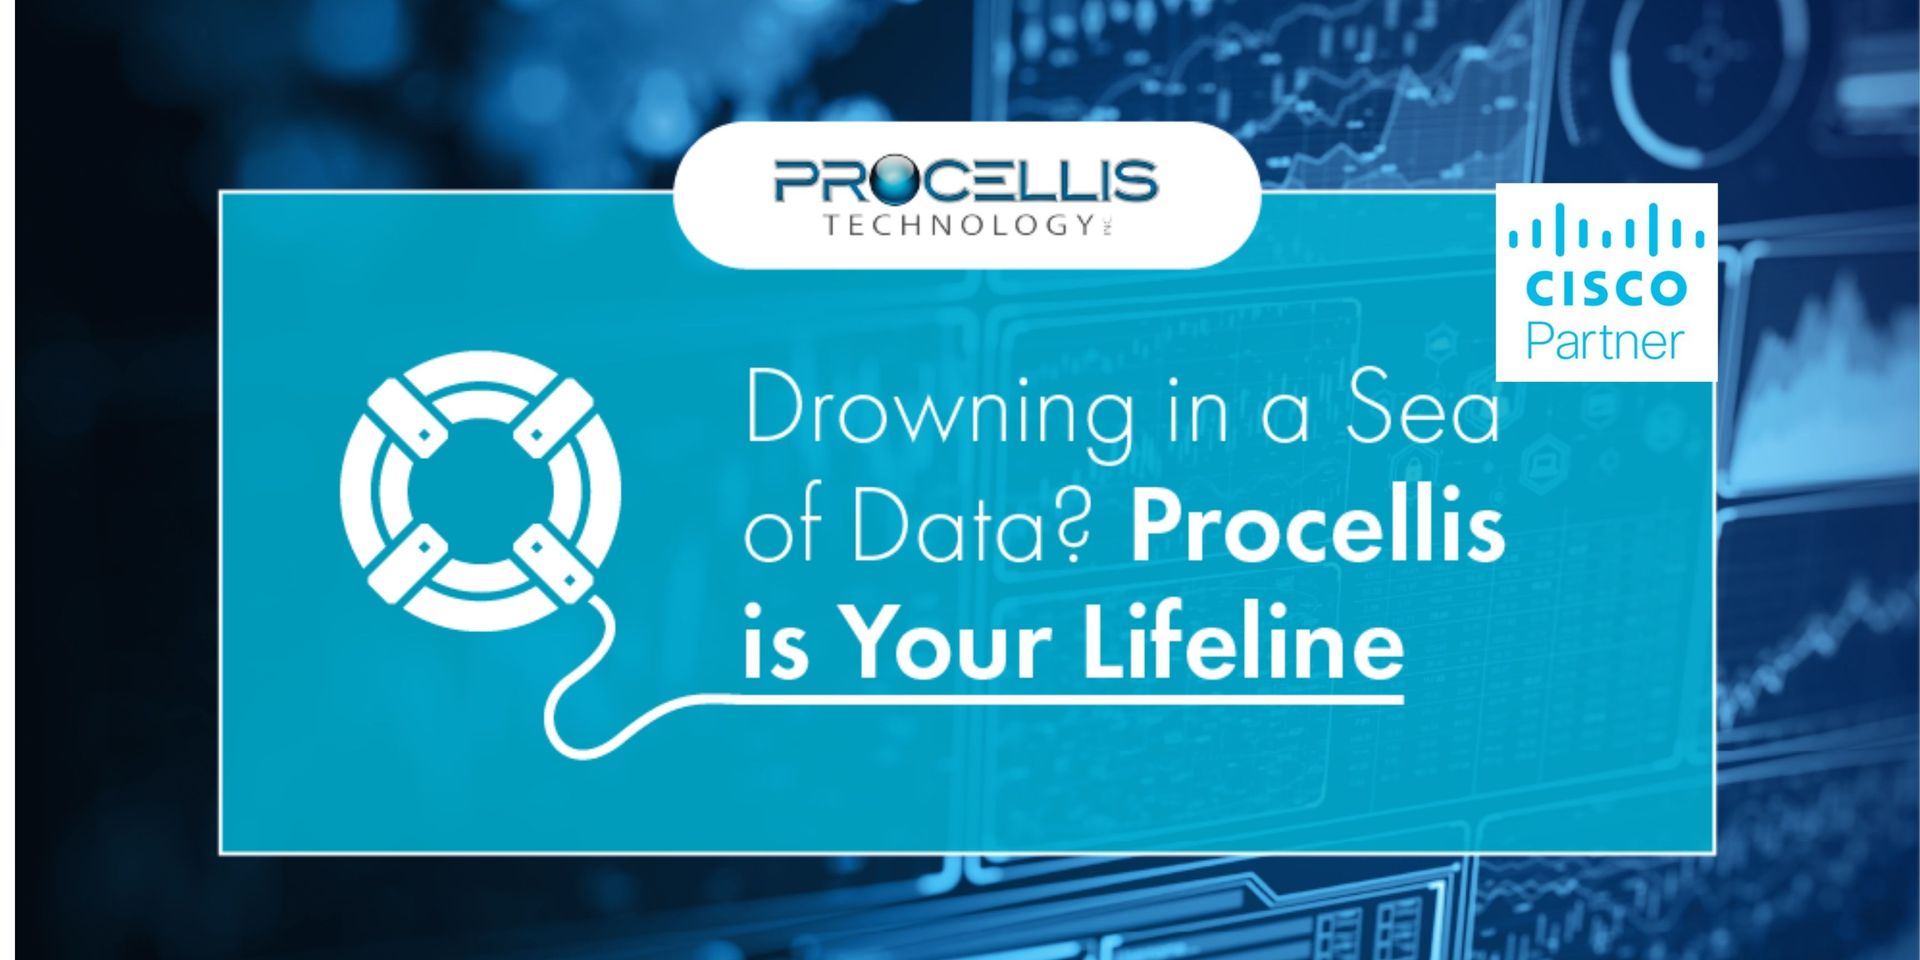 Drowning in a sea of Data?  Procellis is your lifeline.